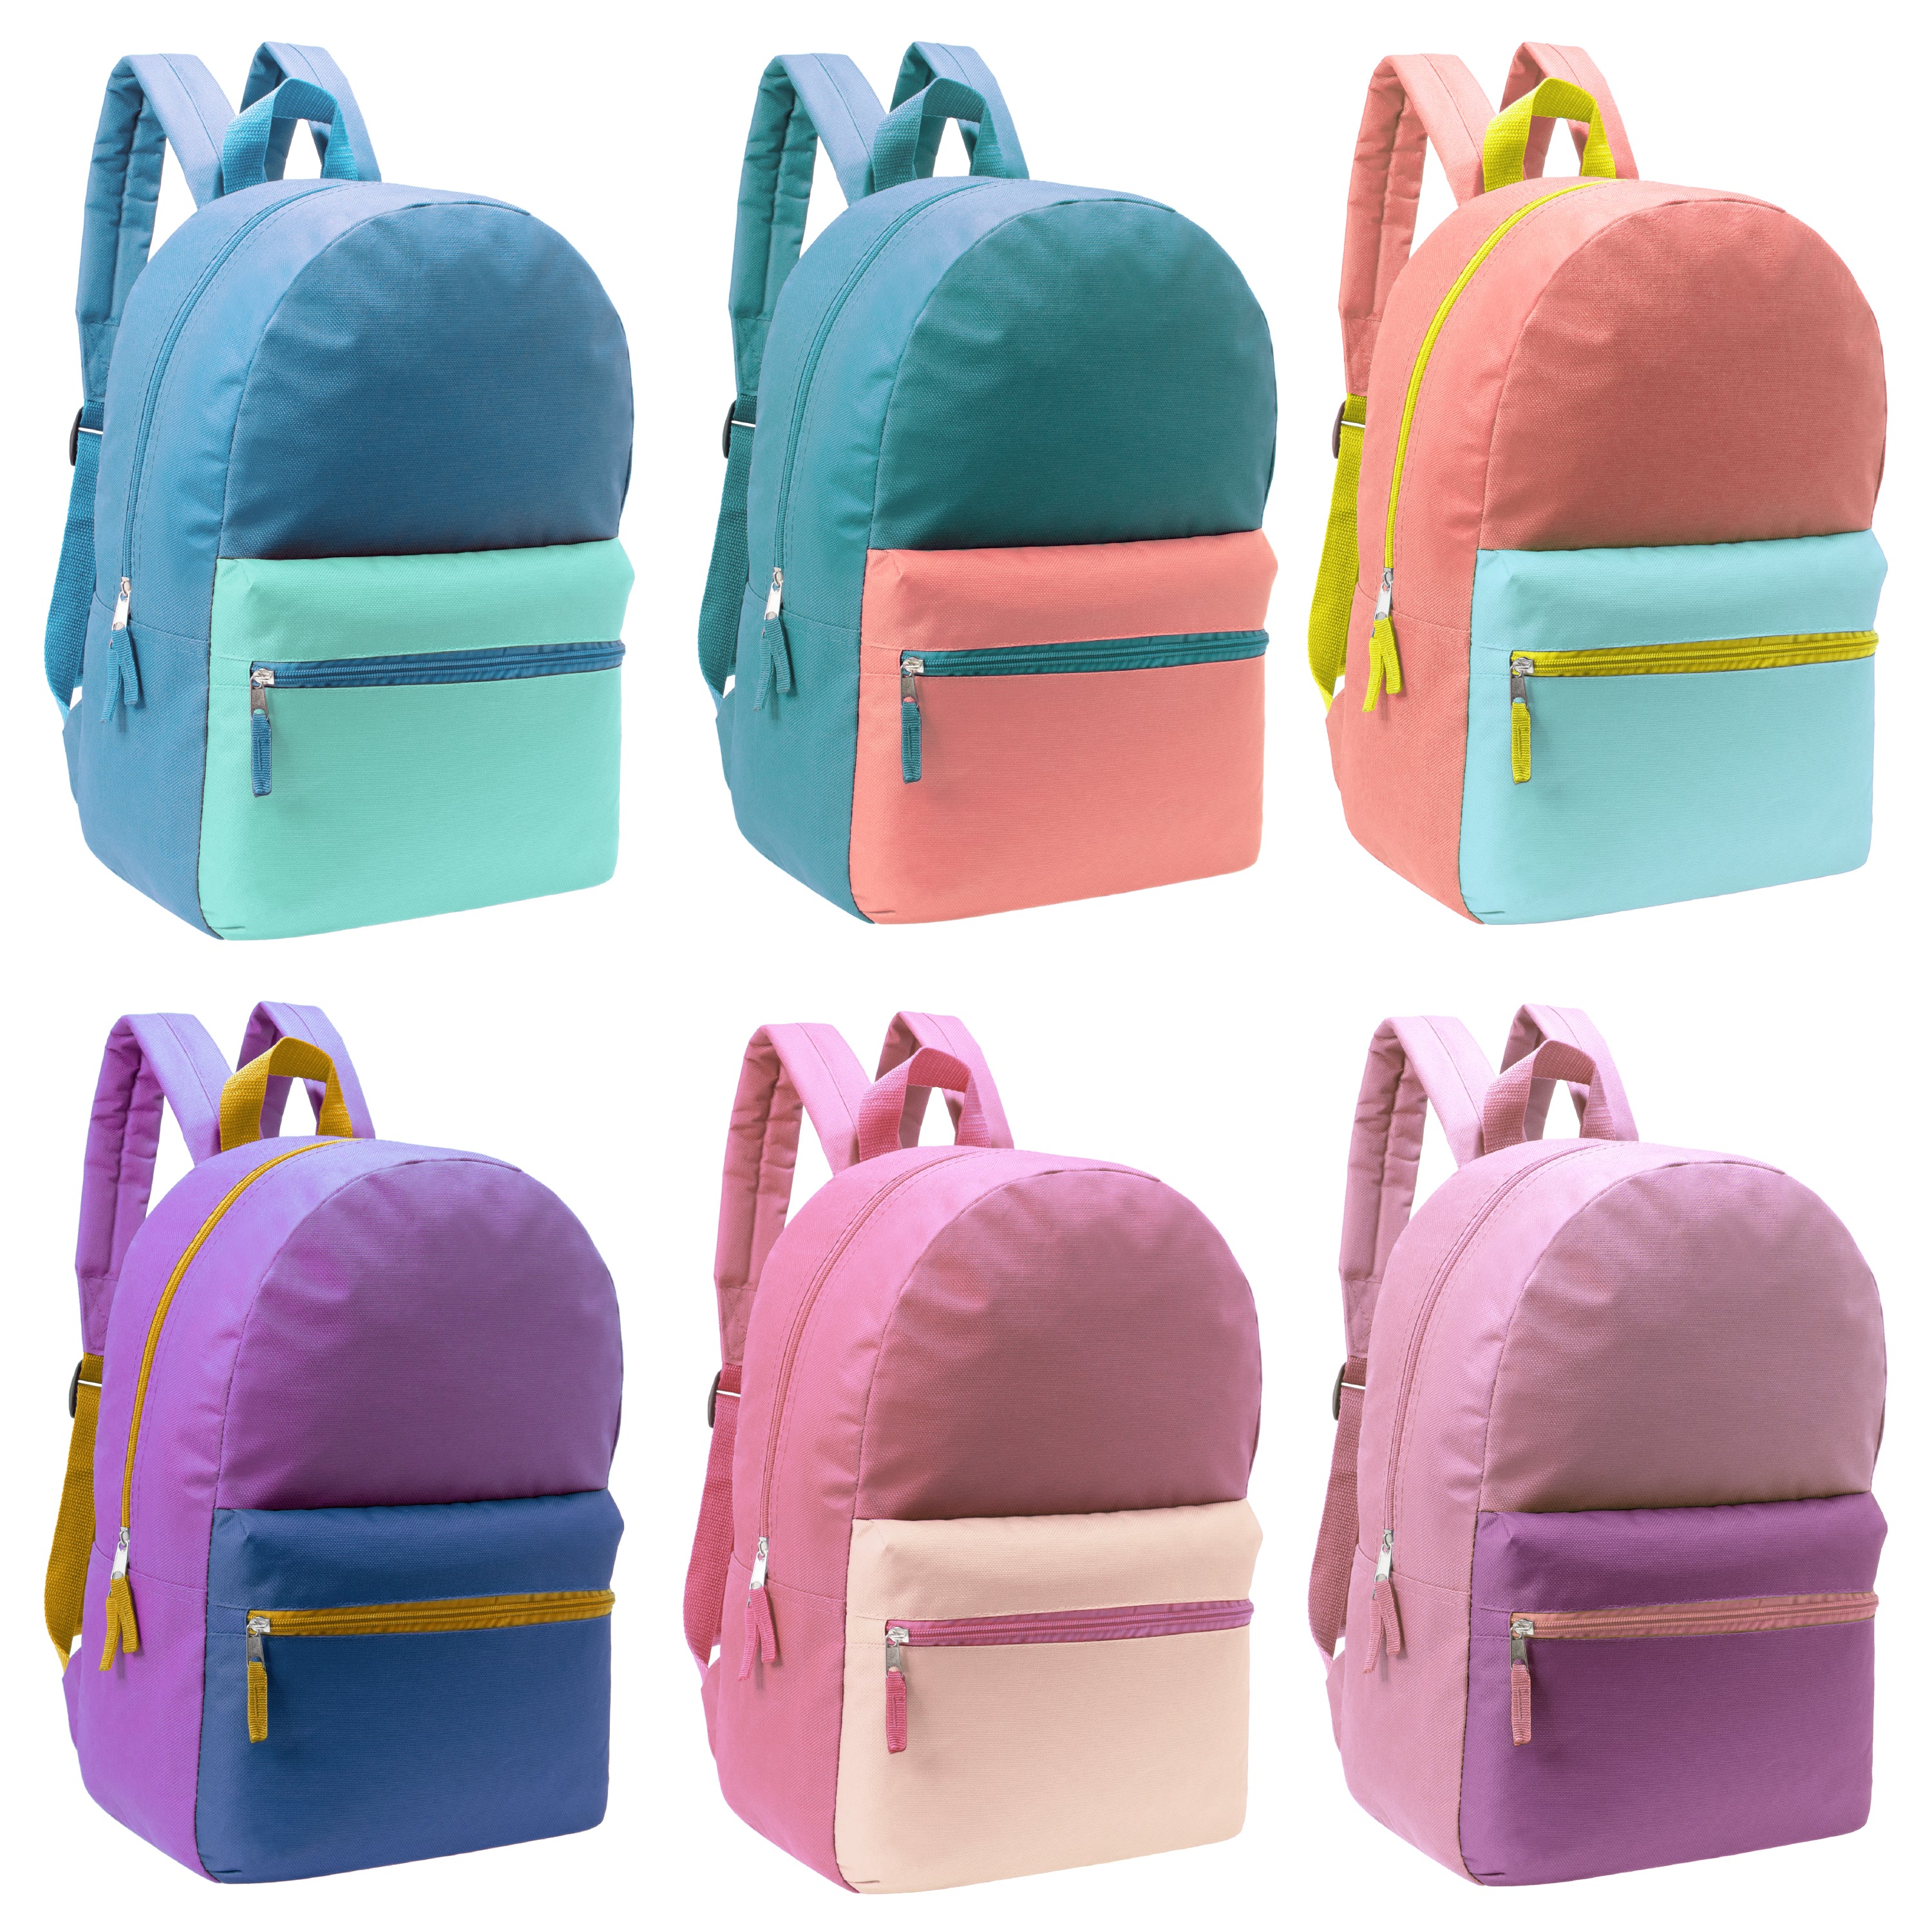 17" Girls Basic Wholesale Backpack in 6 Two Tone Color Combinations - Bulk Case of 24 Backpacks